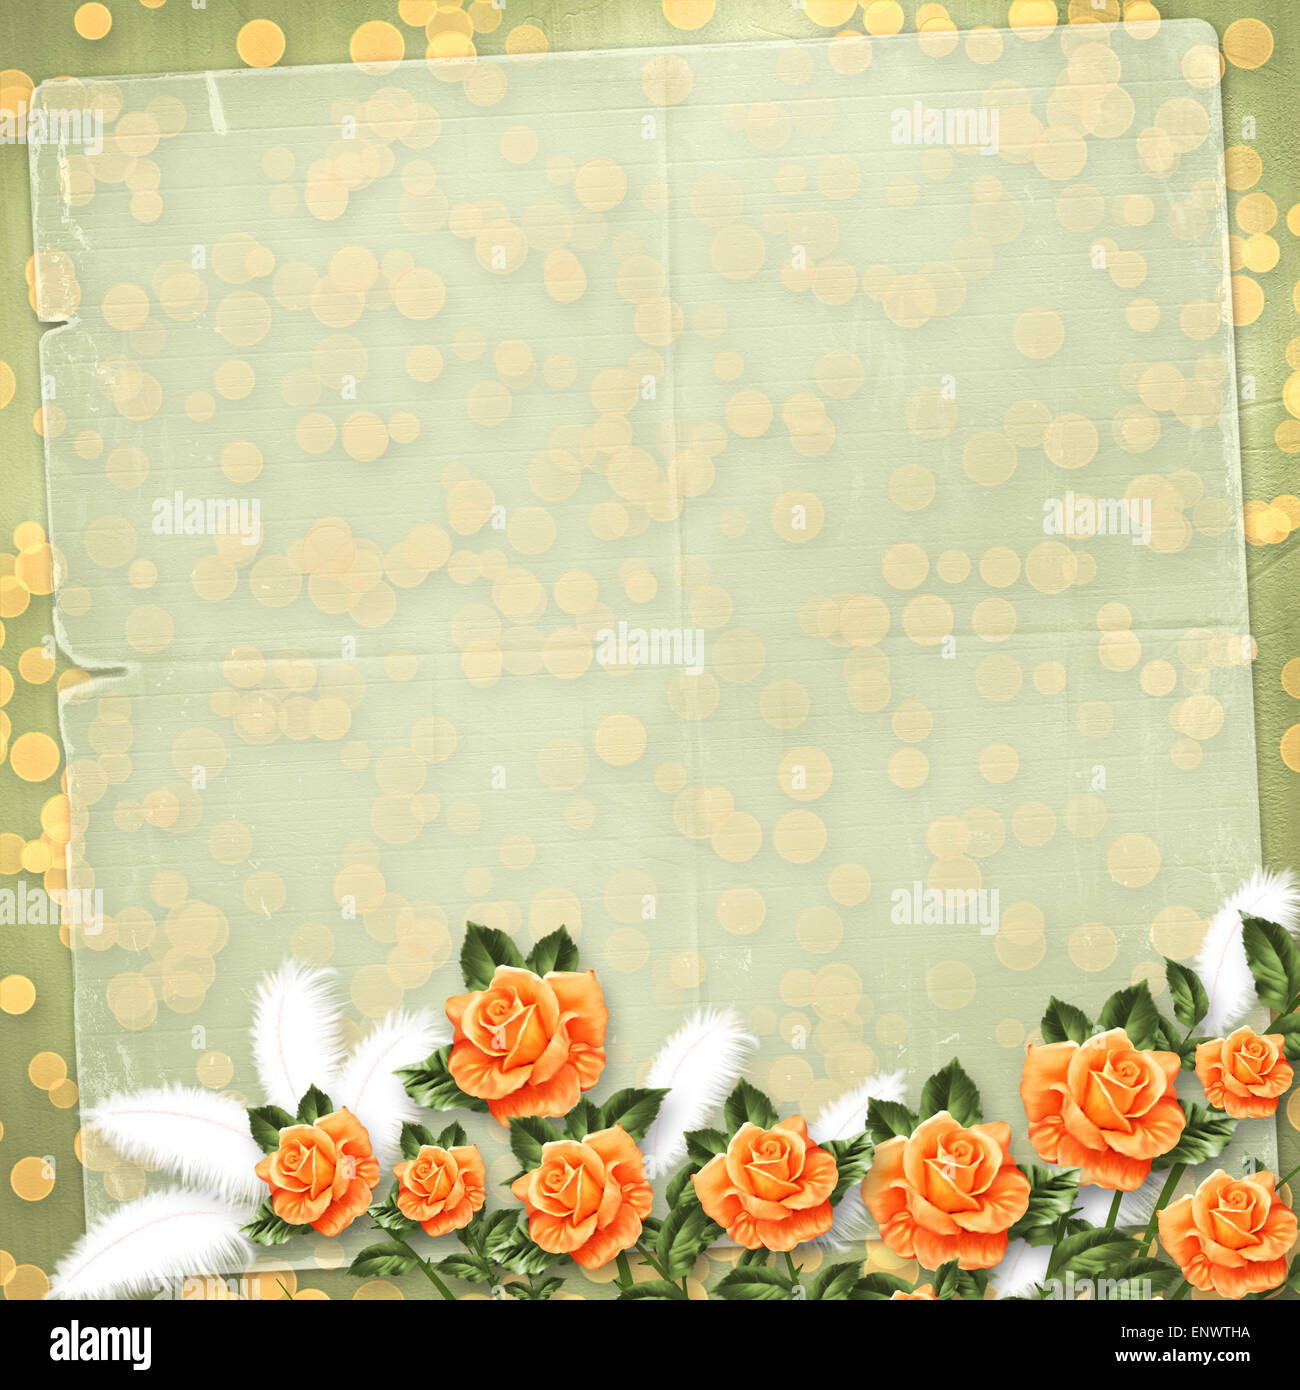 grunge paper for painting with congratulation rose Stock Photo